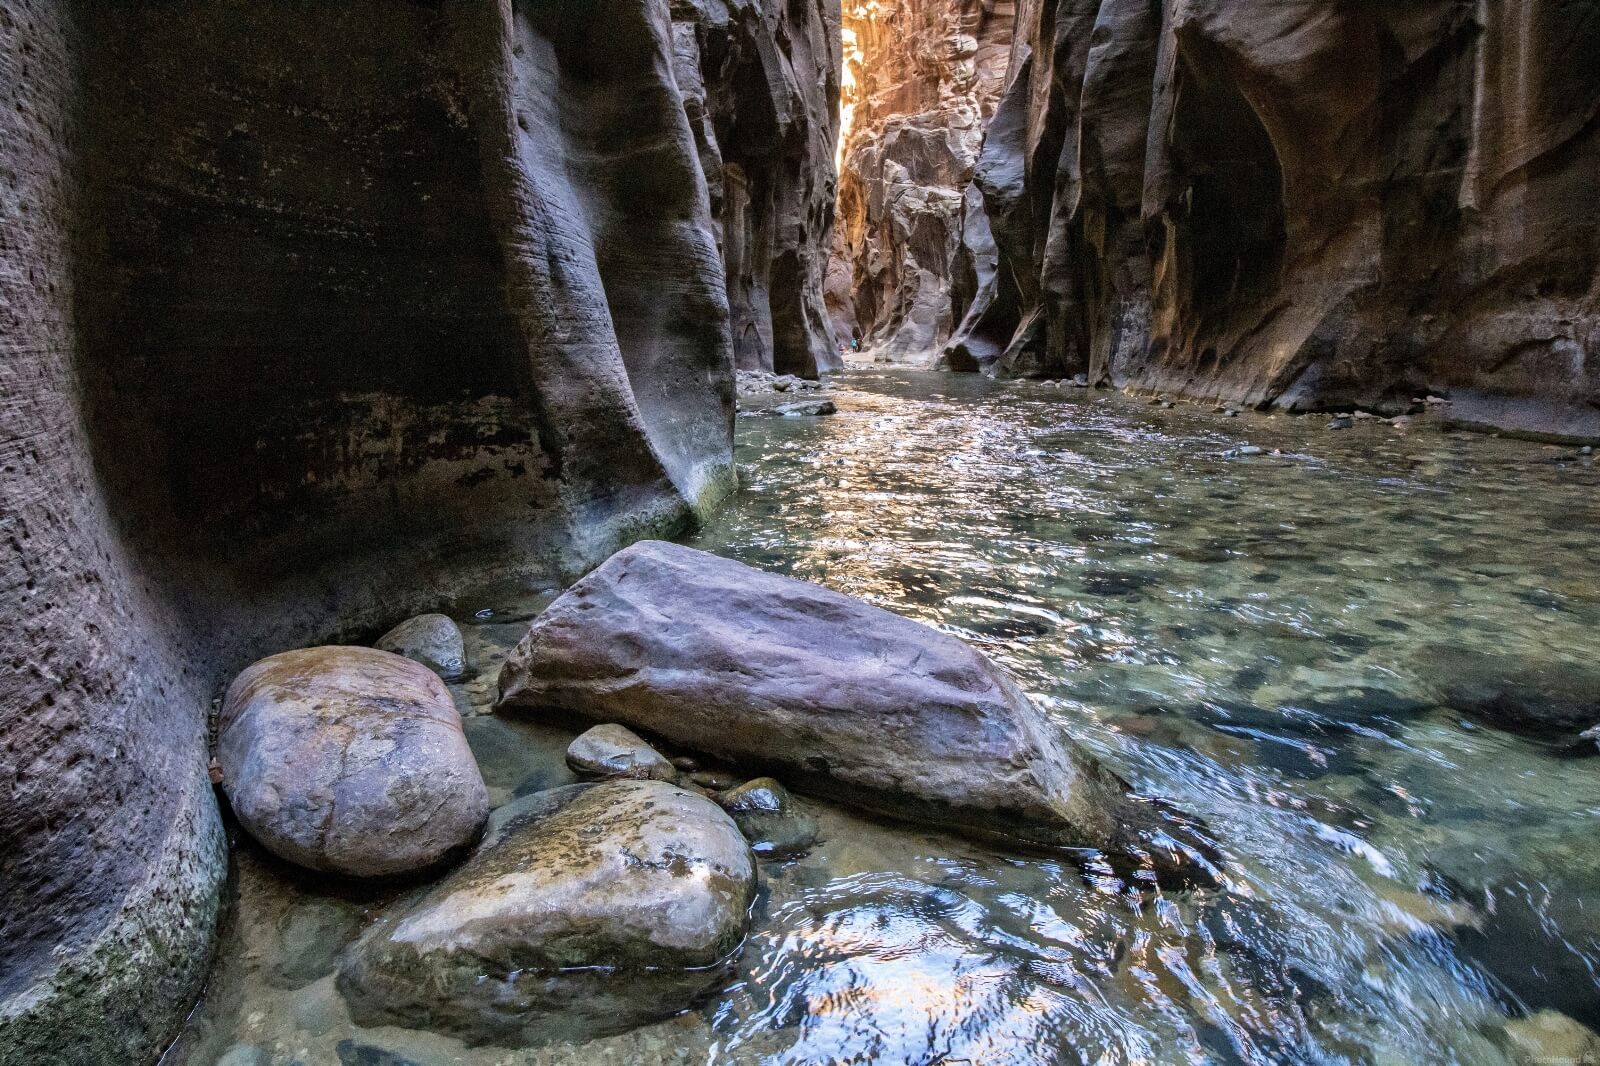 Image of The Virgin Narrows by Gary Leverett